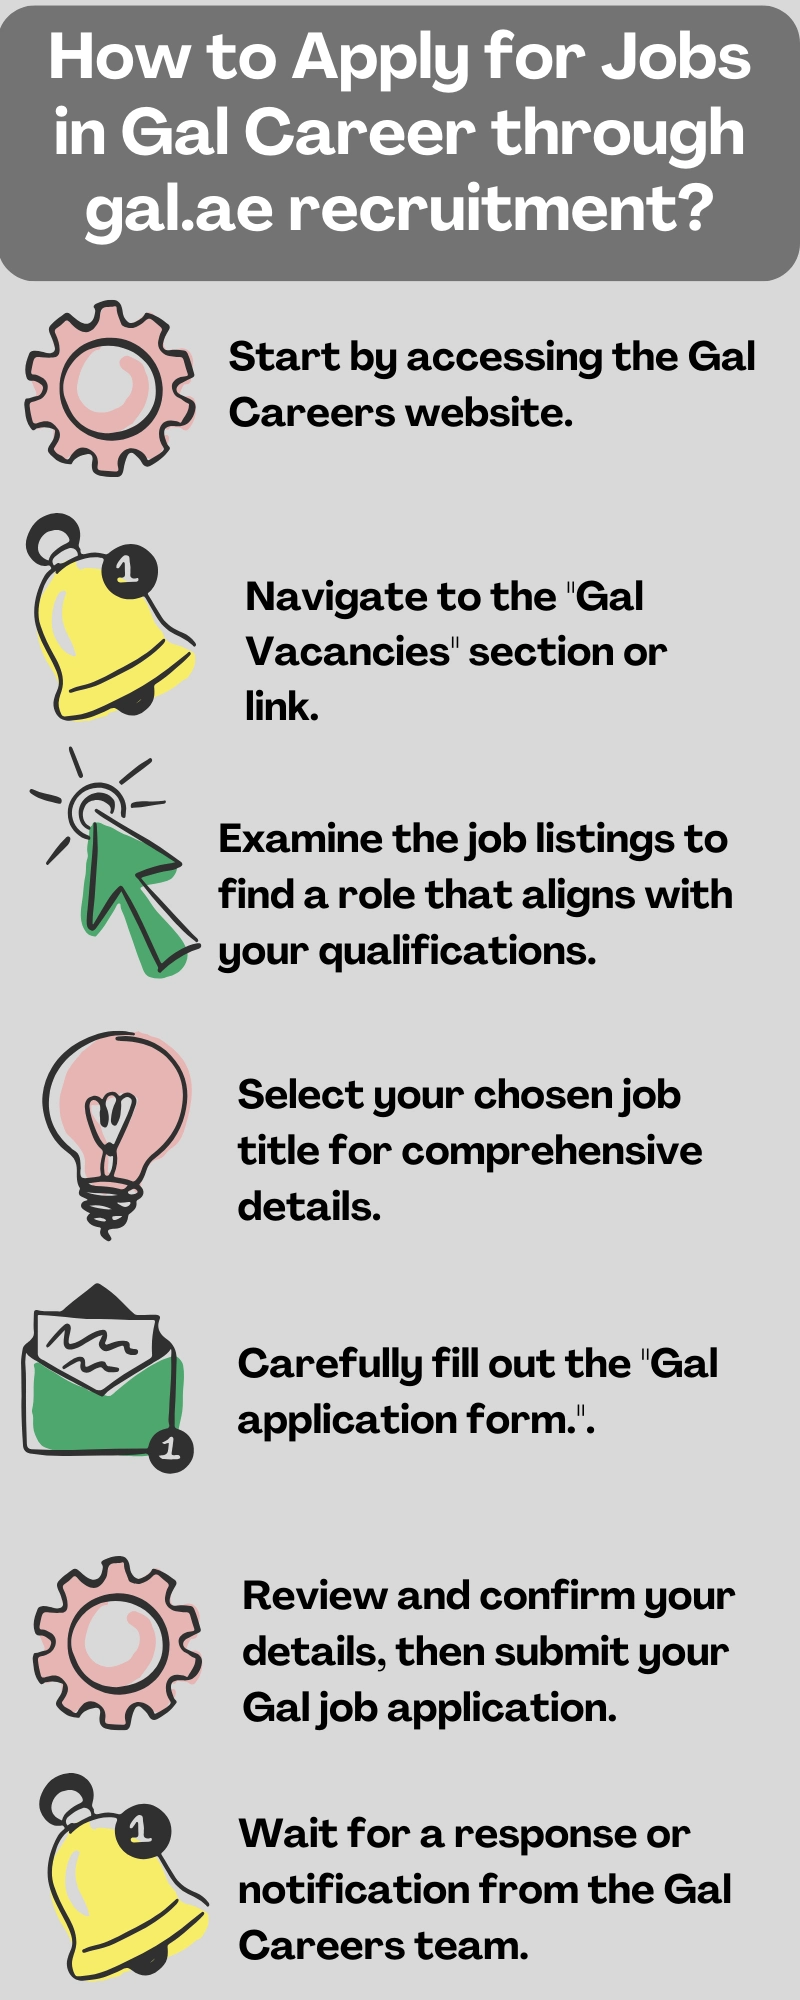 How to Apply for Jobs in Gal Career through gal.ae recruitment?